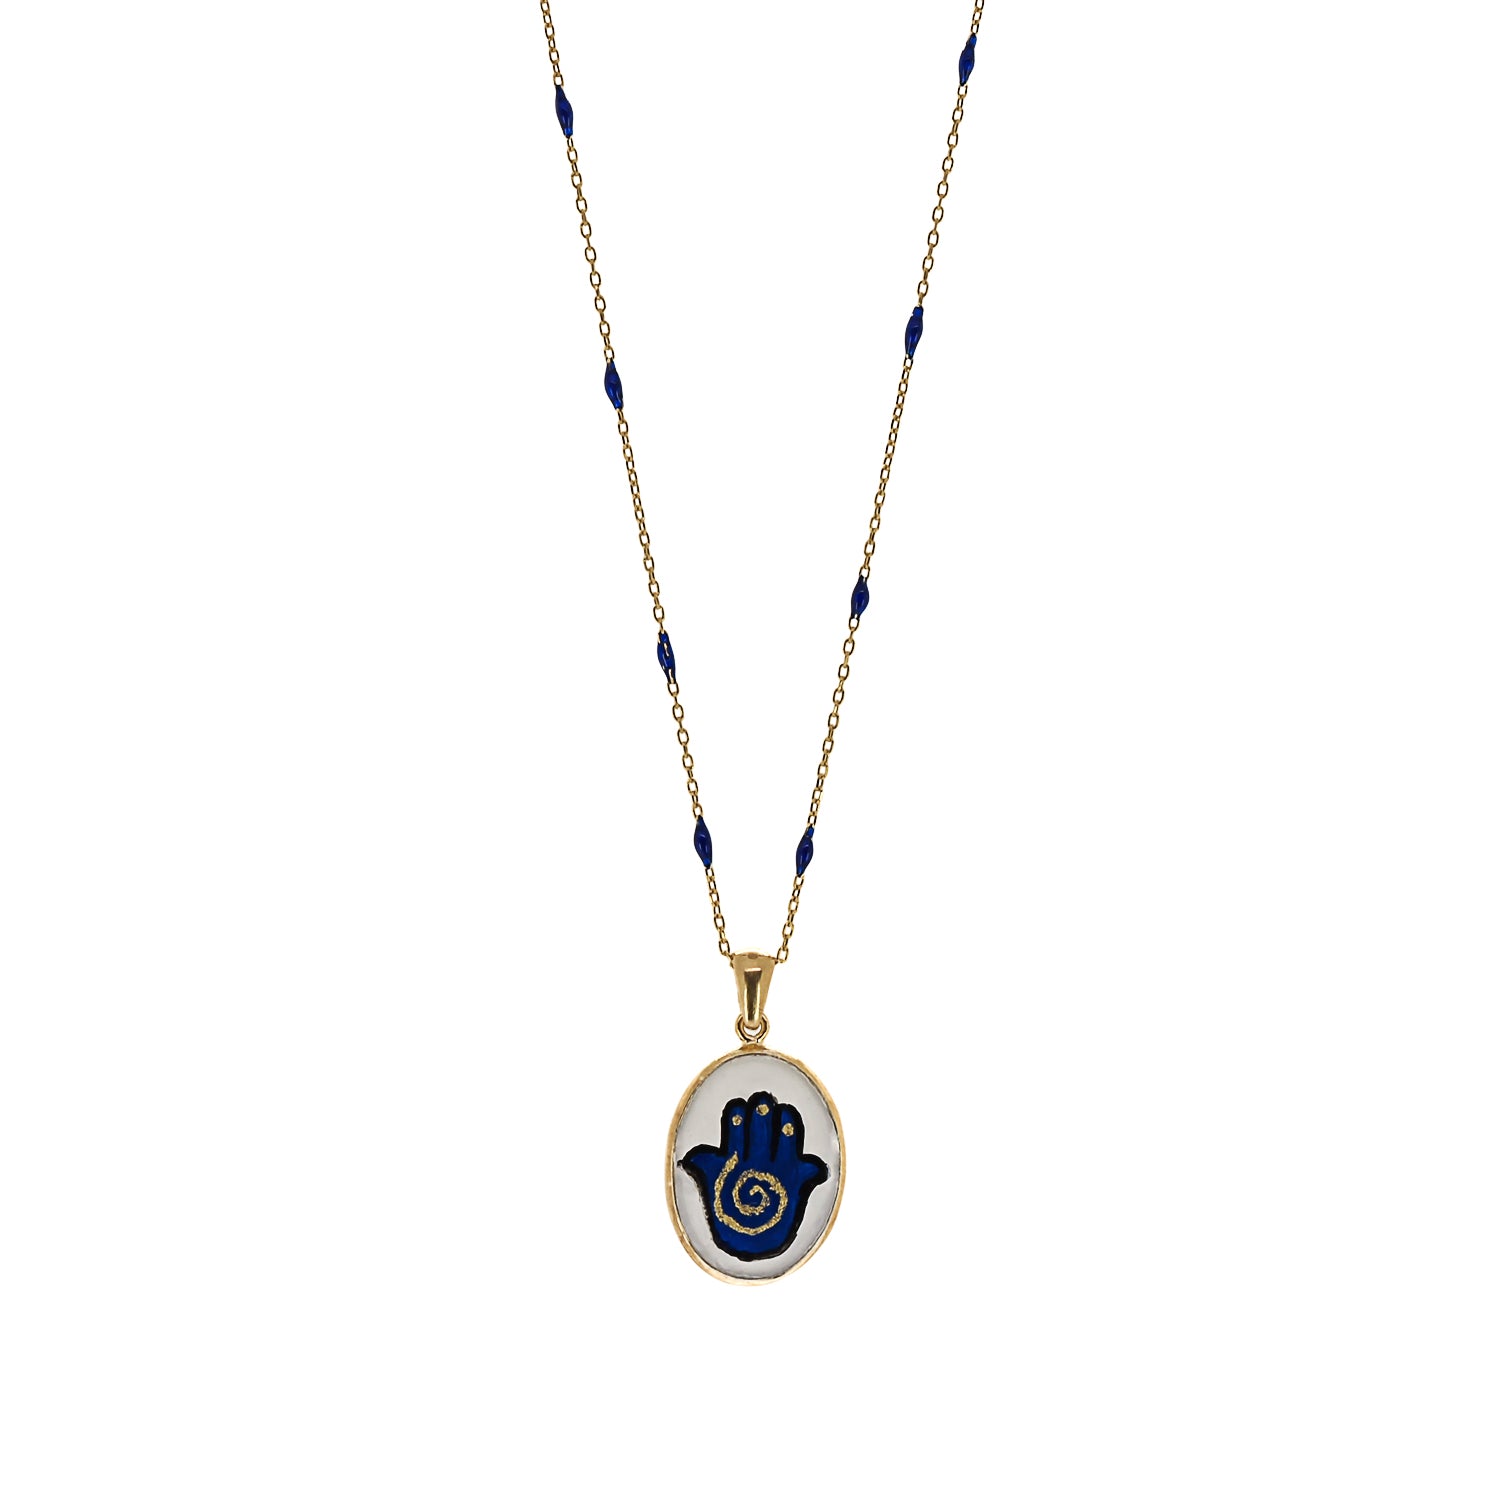 Sterling Silver Hamsa Pendant with Delicate Curves and Blue Enamel Detailing.